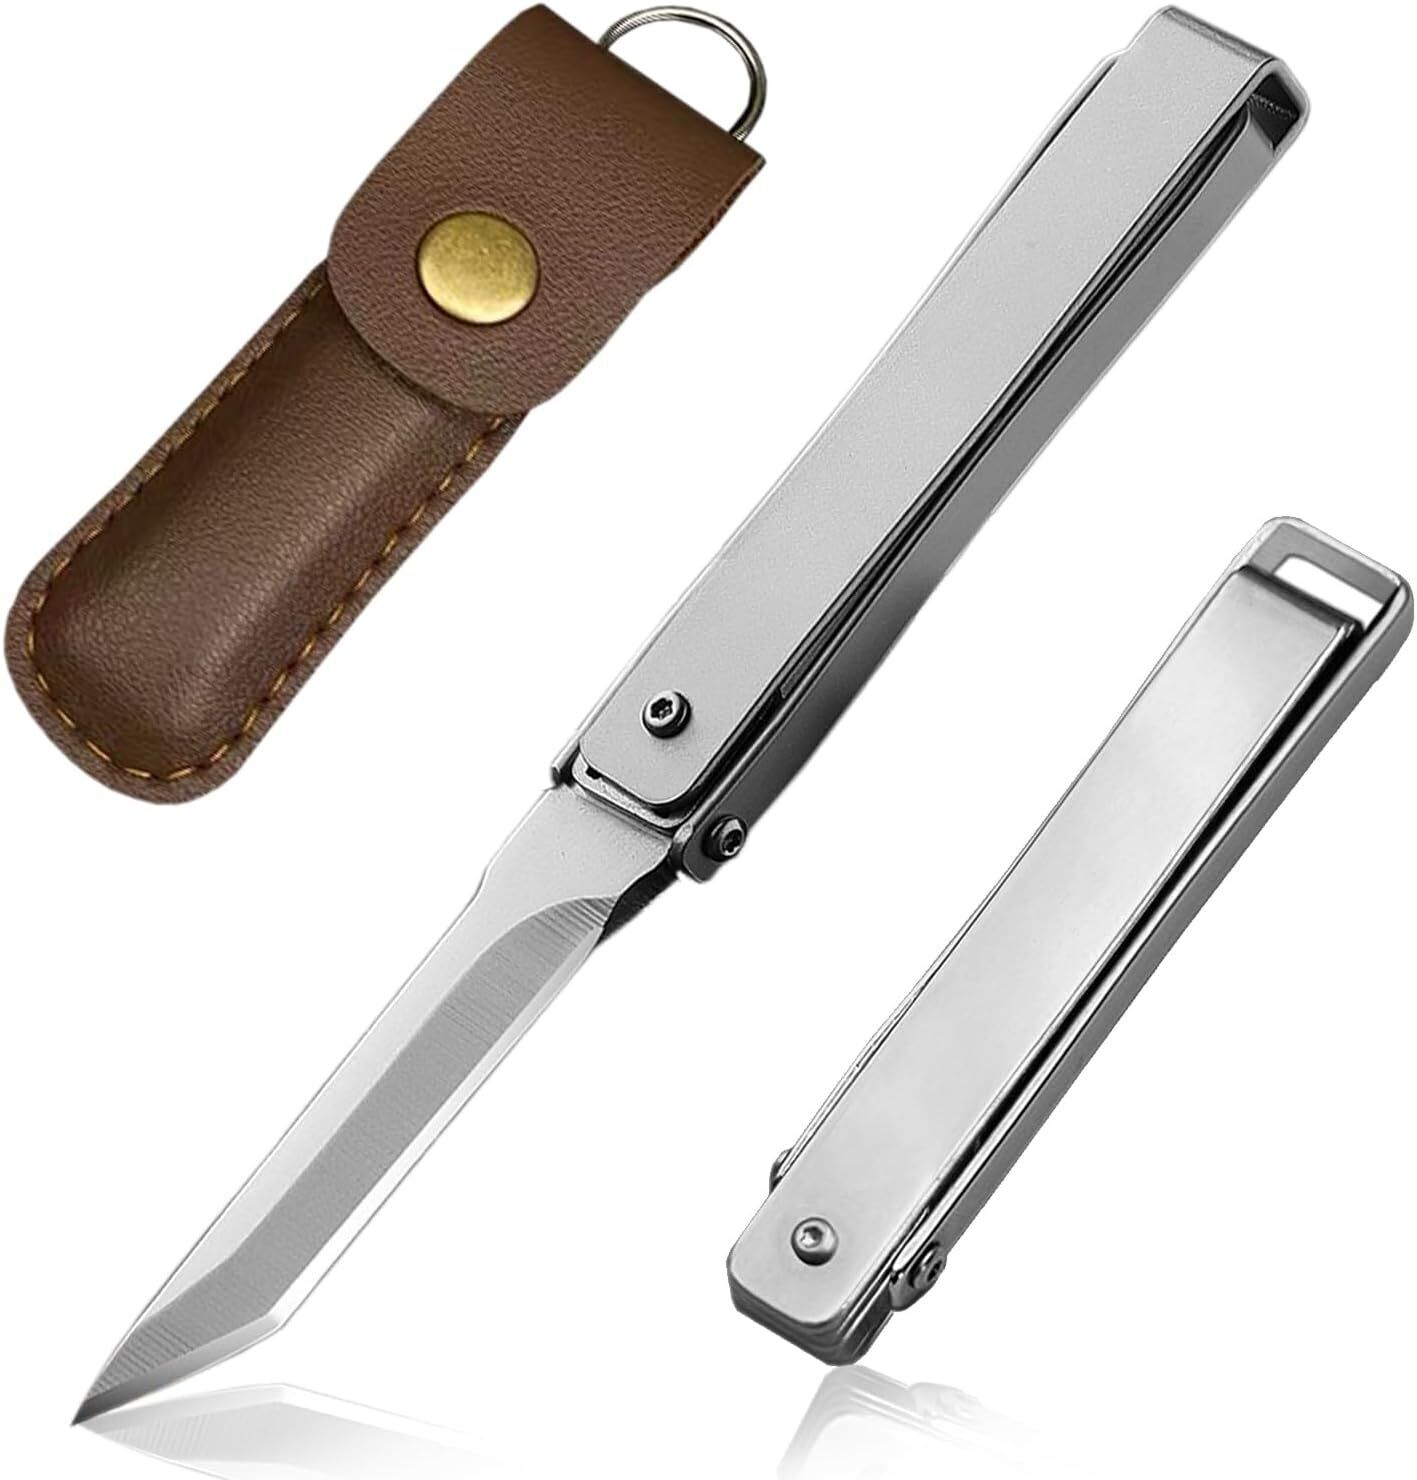 Folding Knife with Sheath Pouch Small Pocket Knives for Outdoor Camping